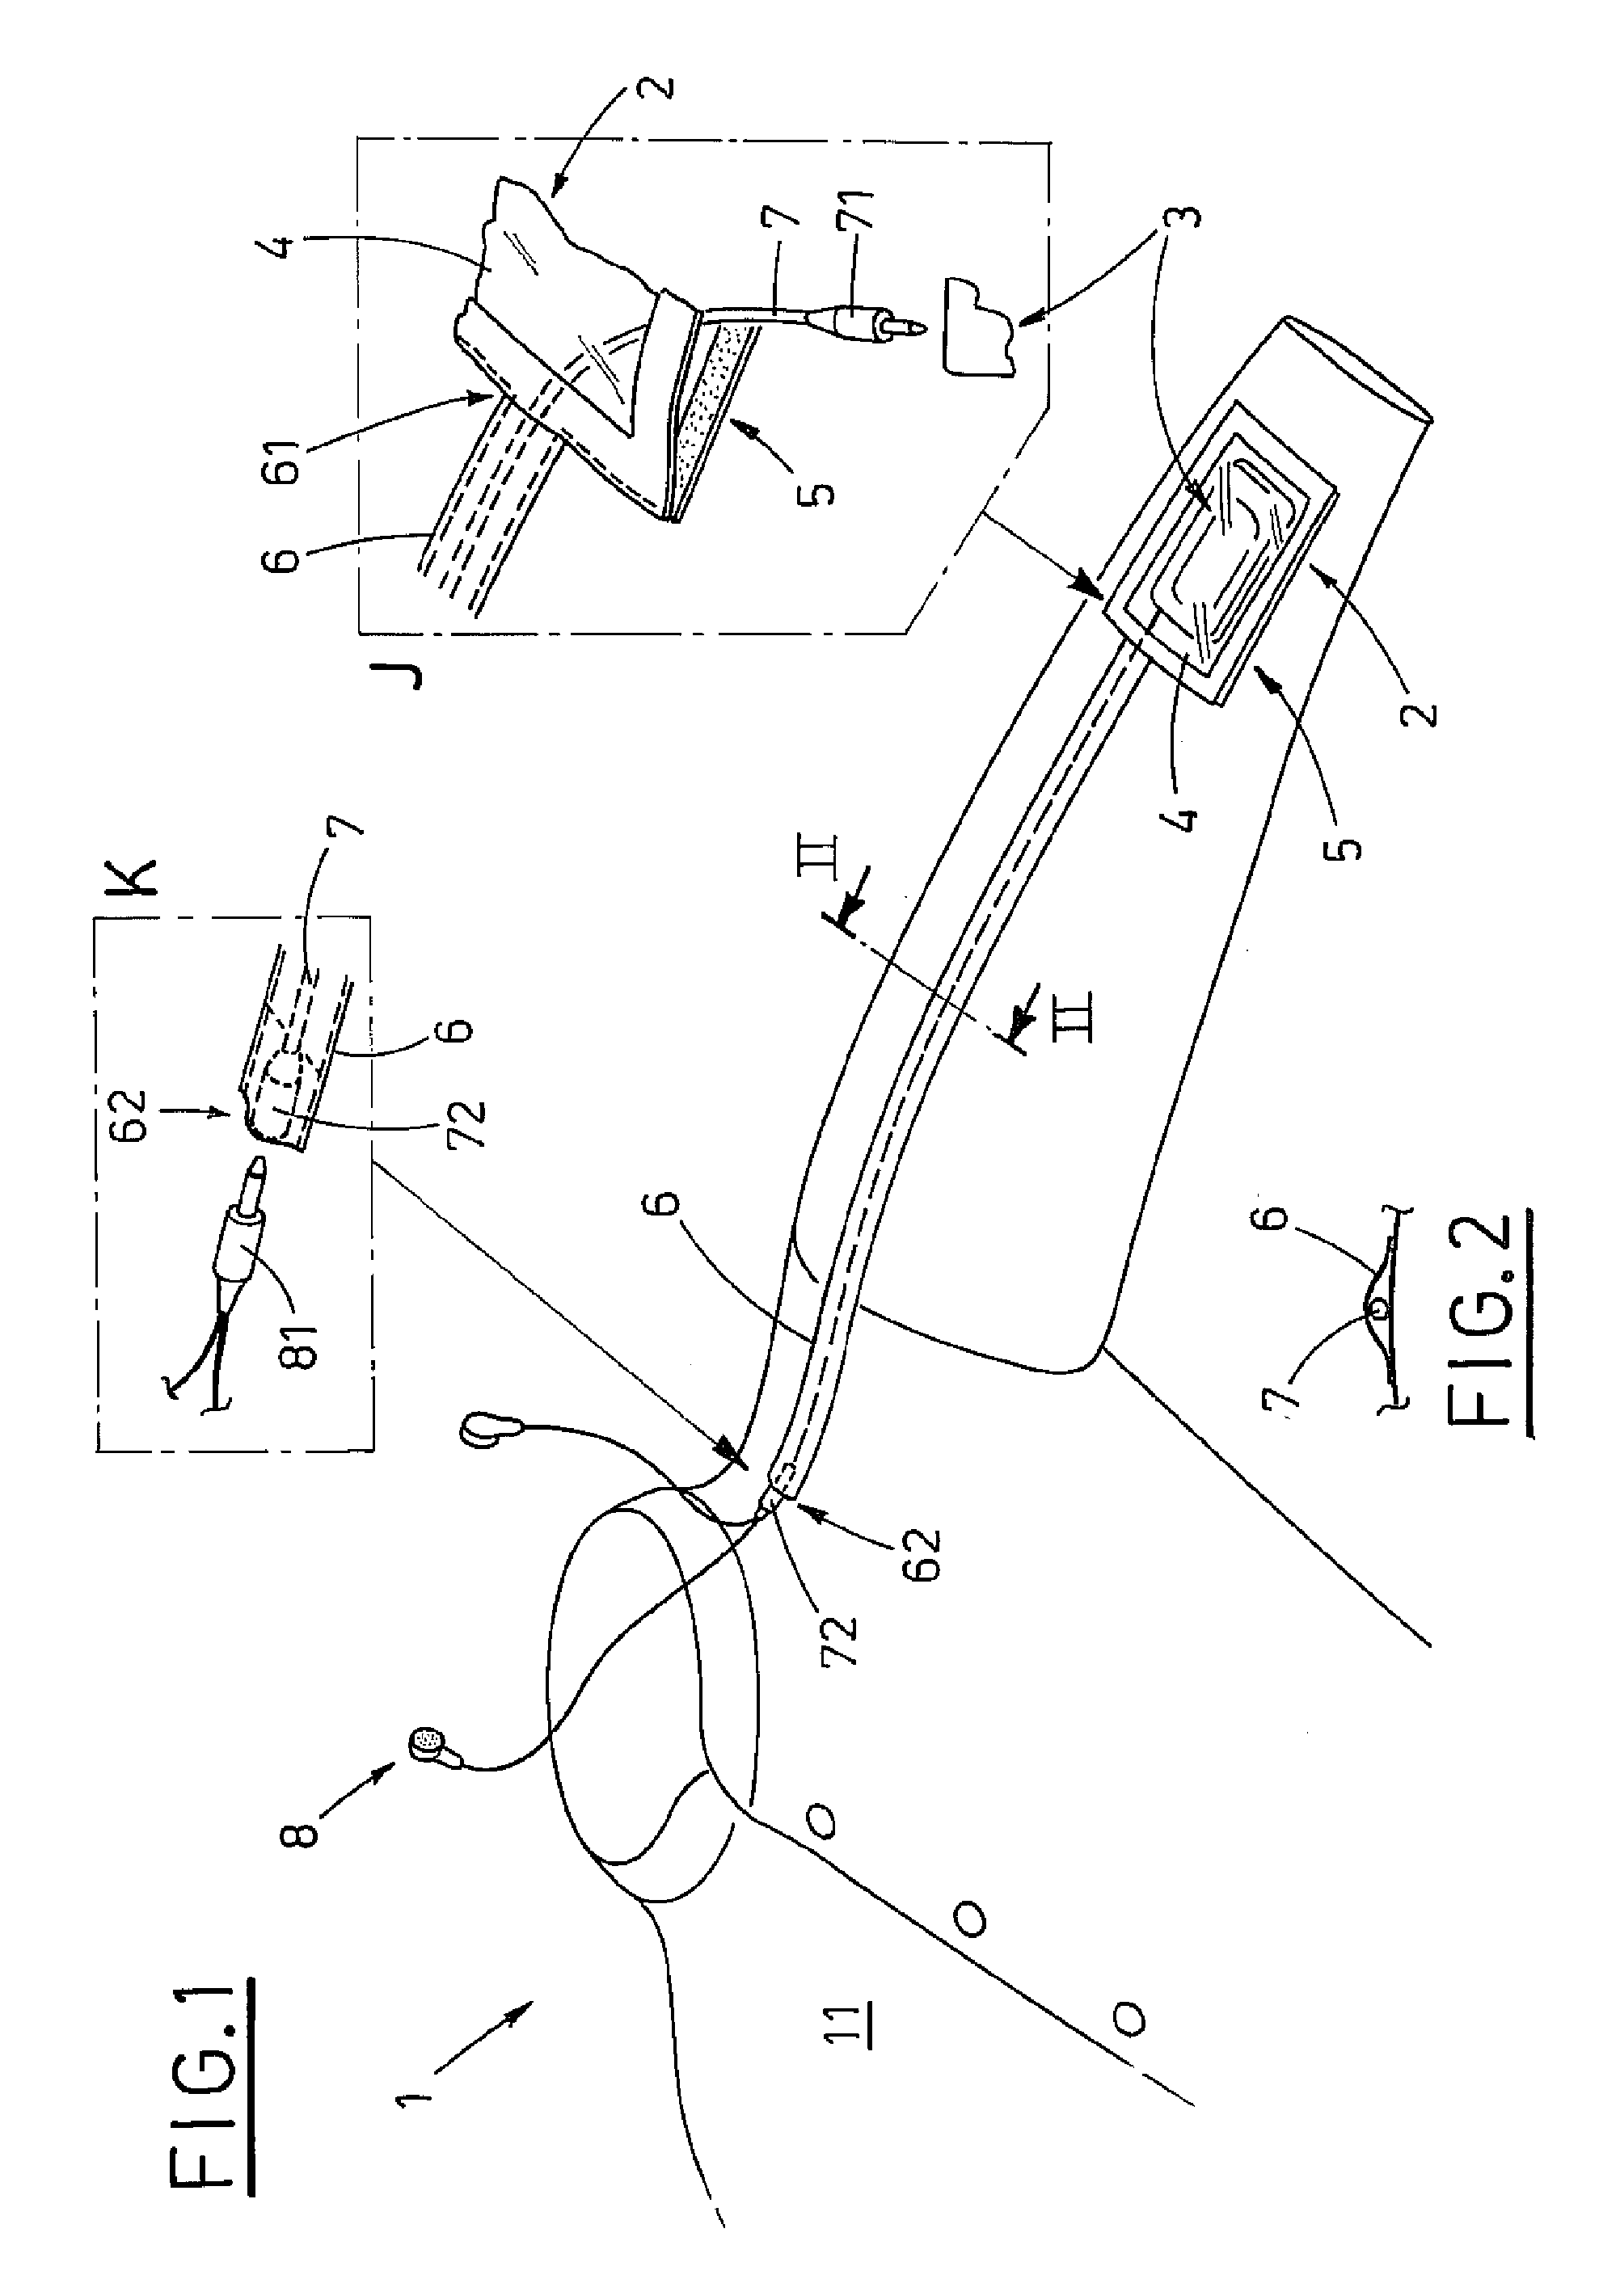 Article Of Clothing Particularly Intended To Be Used Along With Electronic Devices